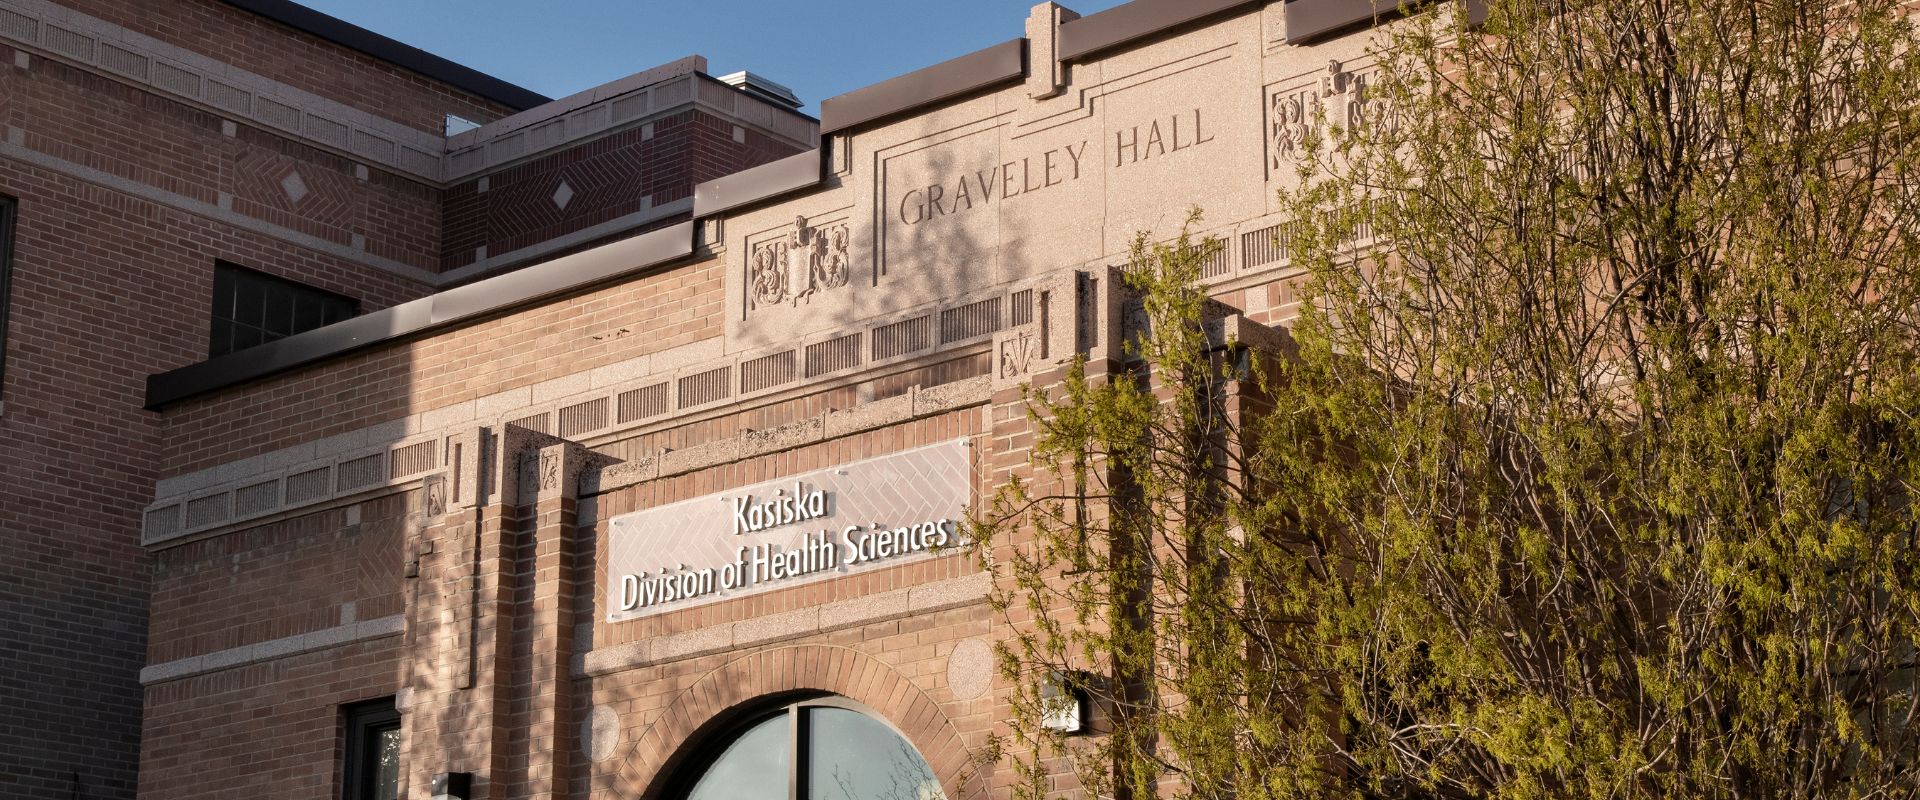 The front of the Gravely Hall building on the Pocatello Campus, a brick building with large window